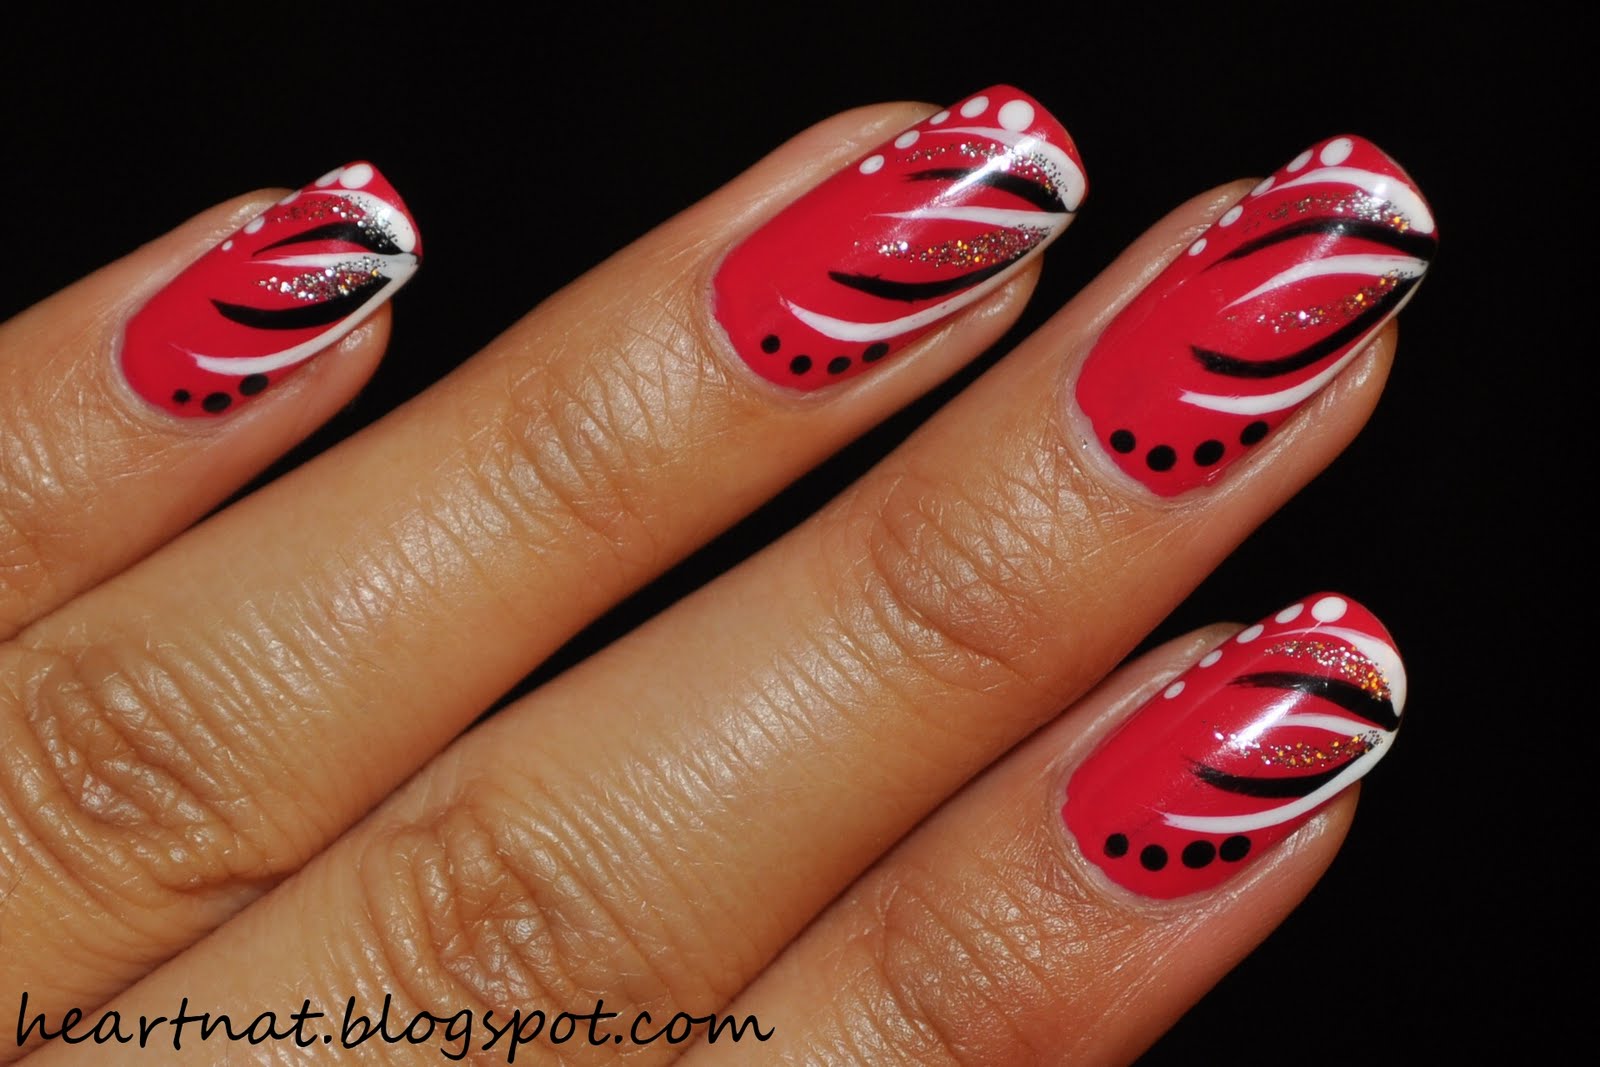 1. Freehand Nail Art Designs for Beginners - wide 1